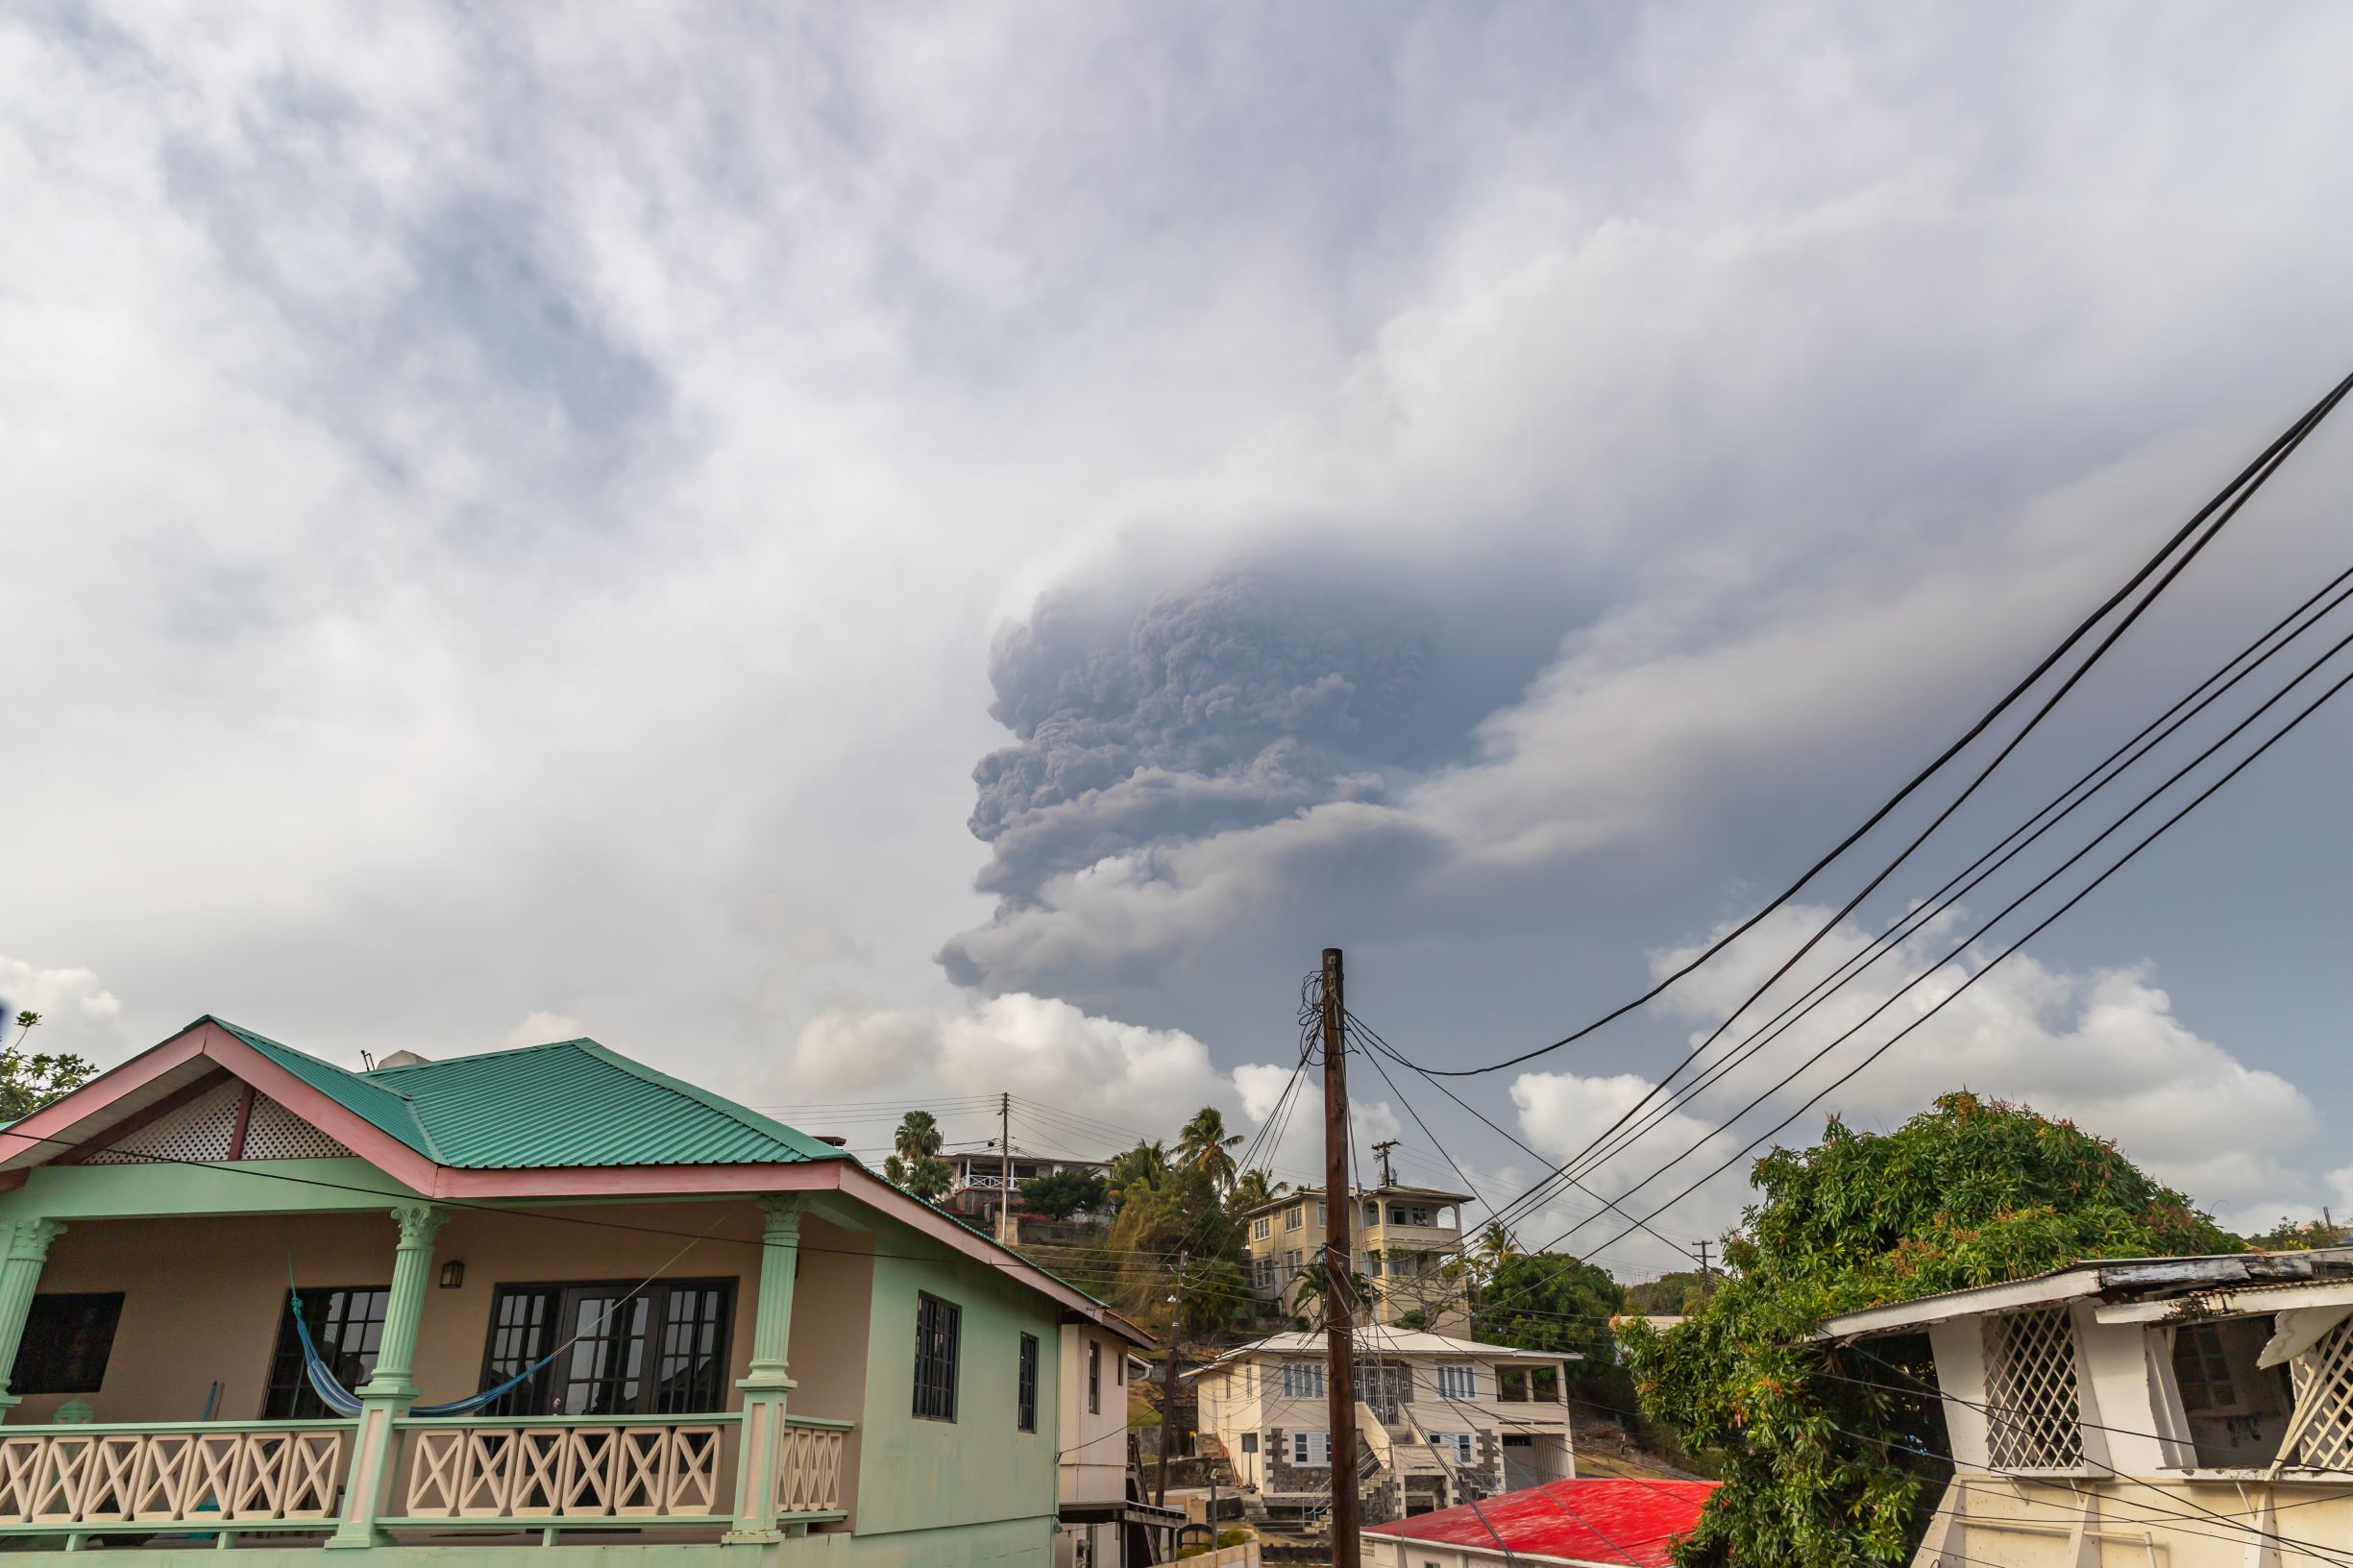 clouds of ash rise above homes in St. Vincent after volcano eruption